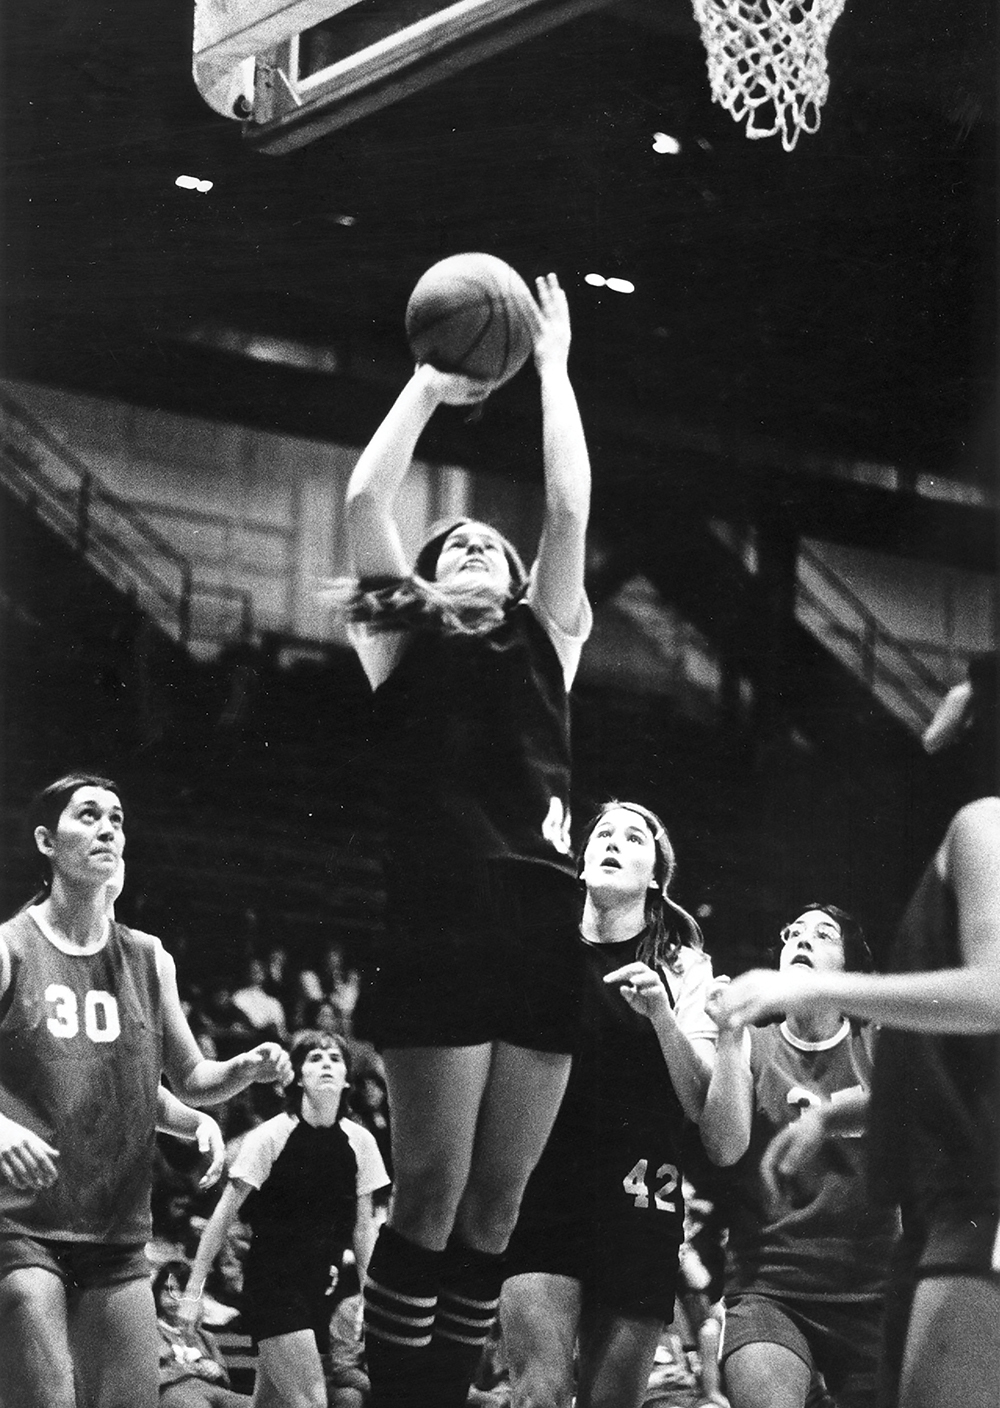 A 1974 black and white photo of a UW women's basketball player about to make a basket